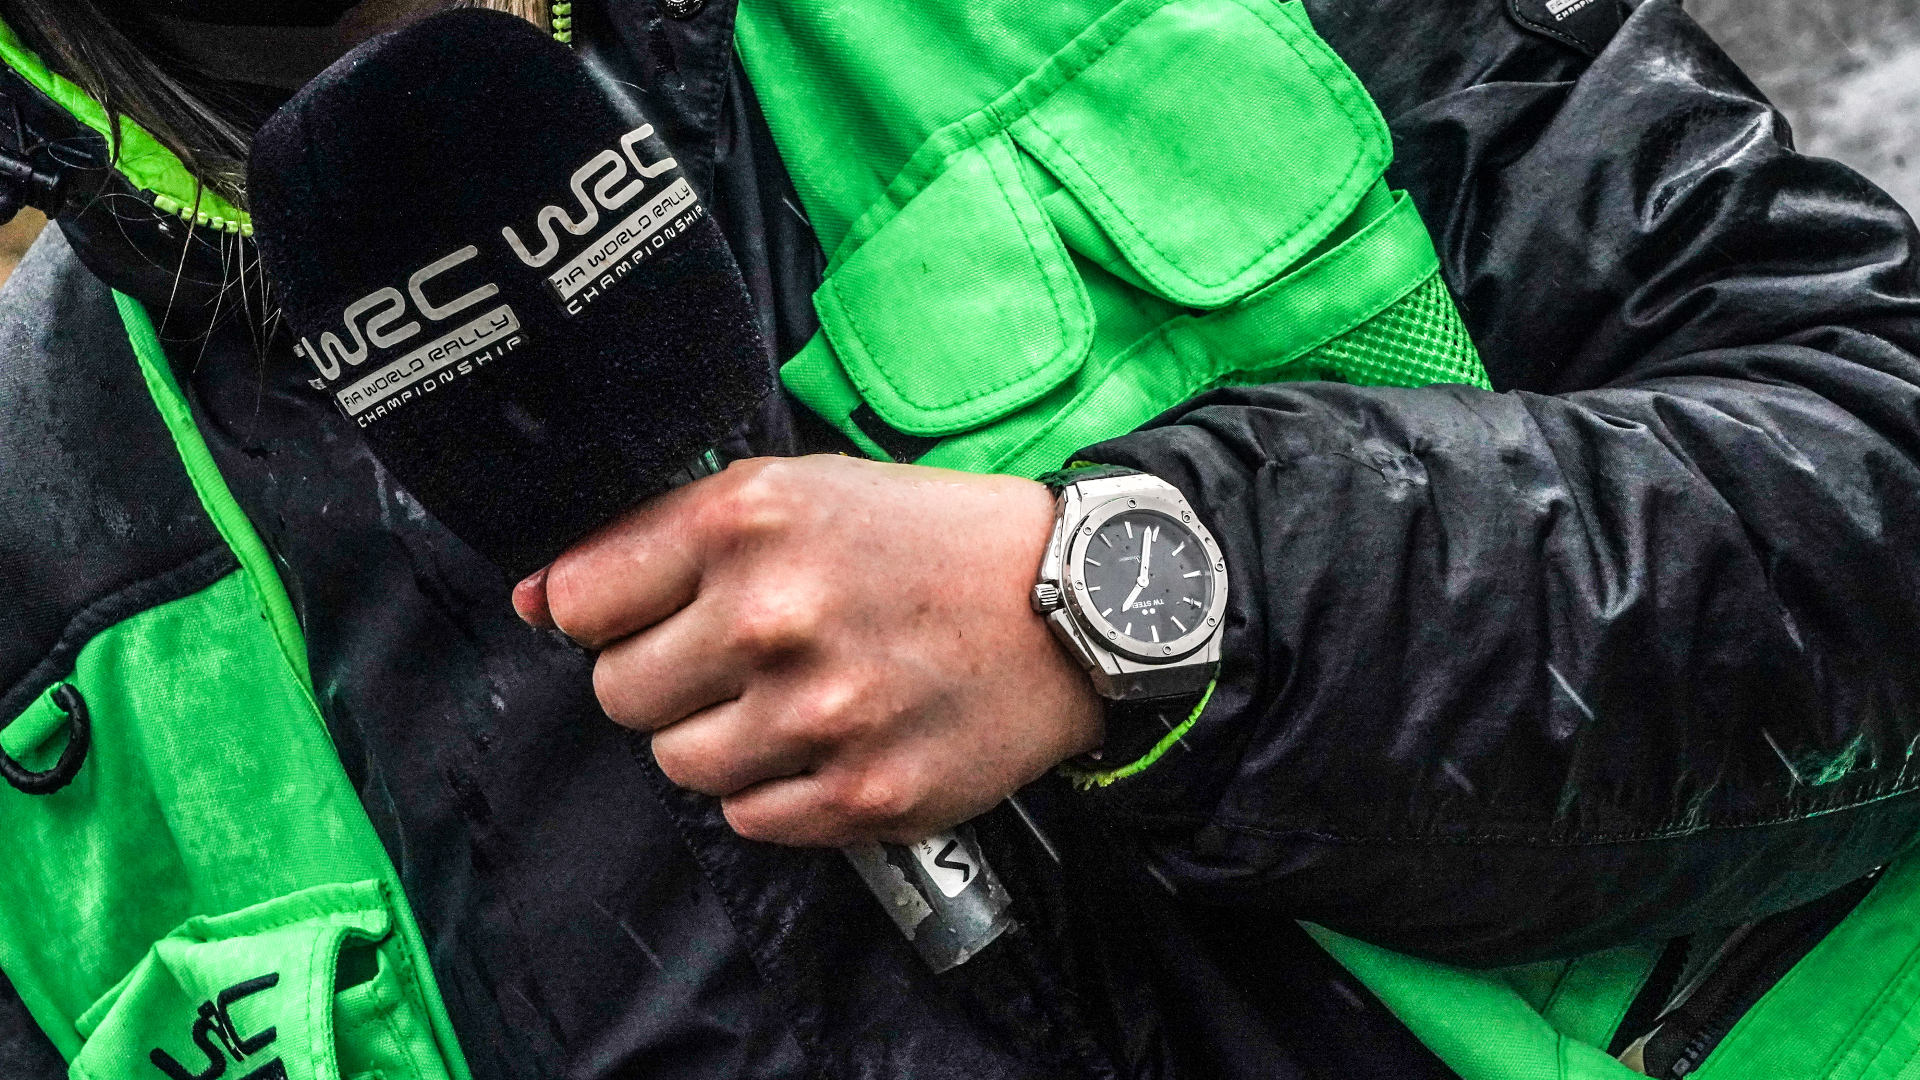 TW Steel watches as seen in the WRC